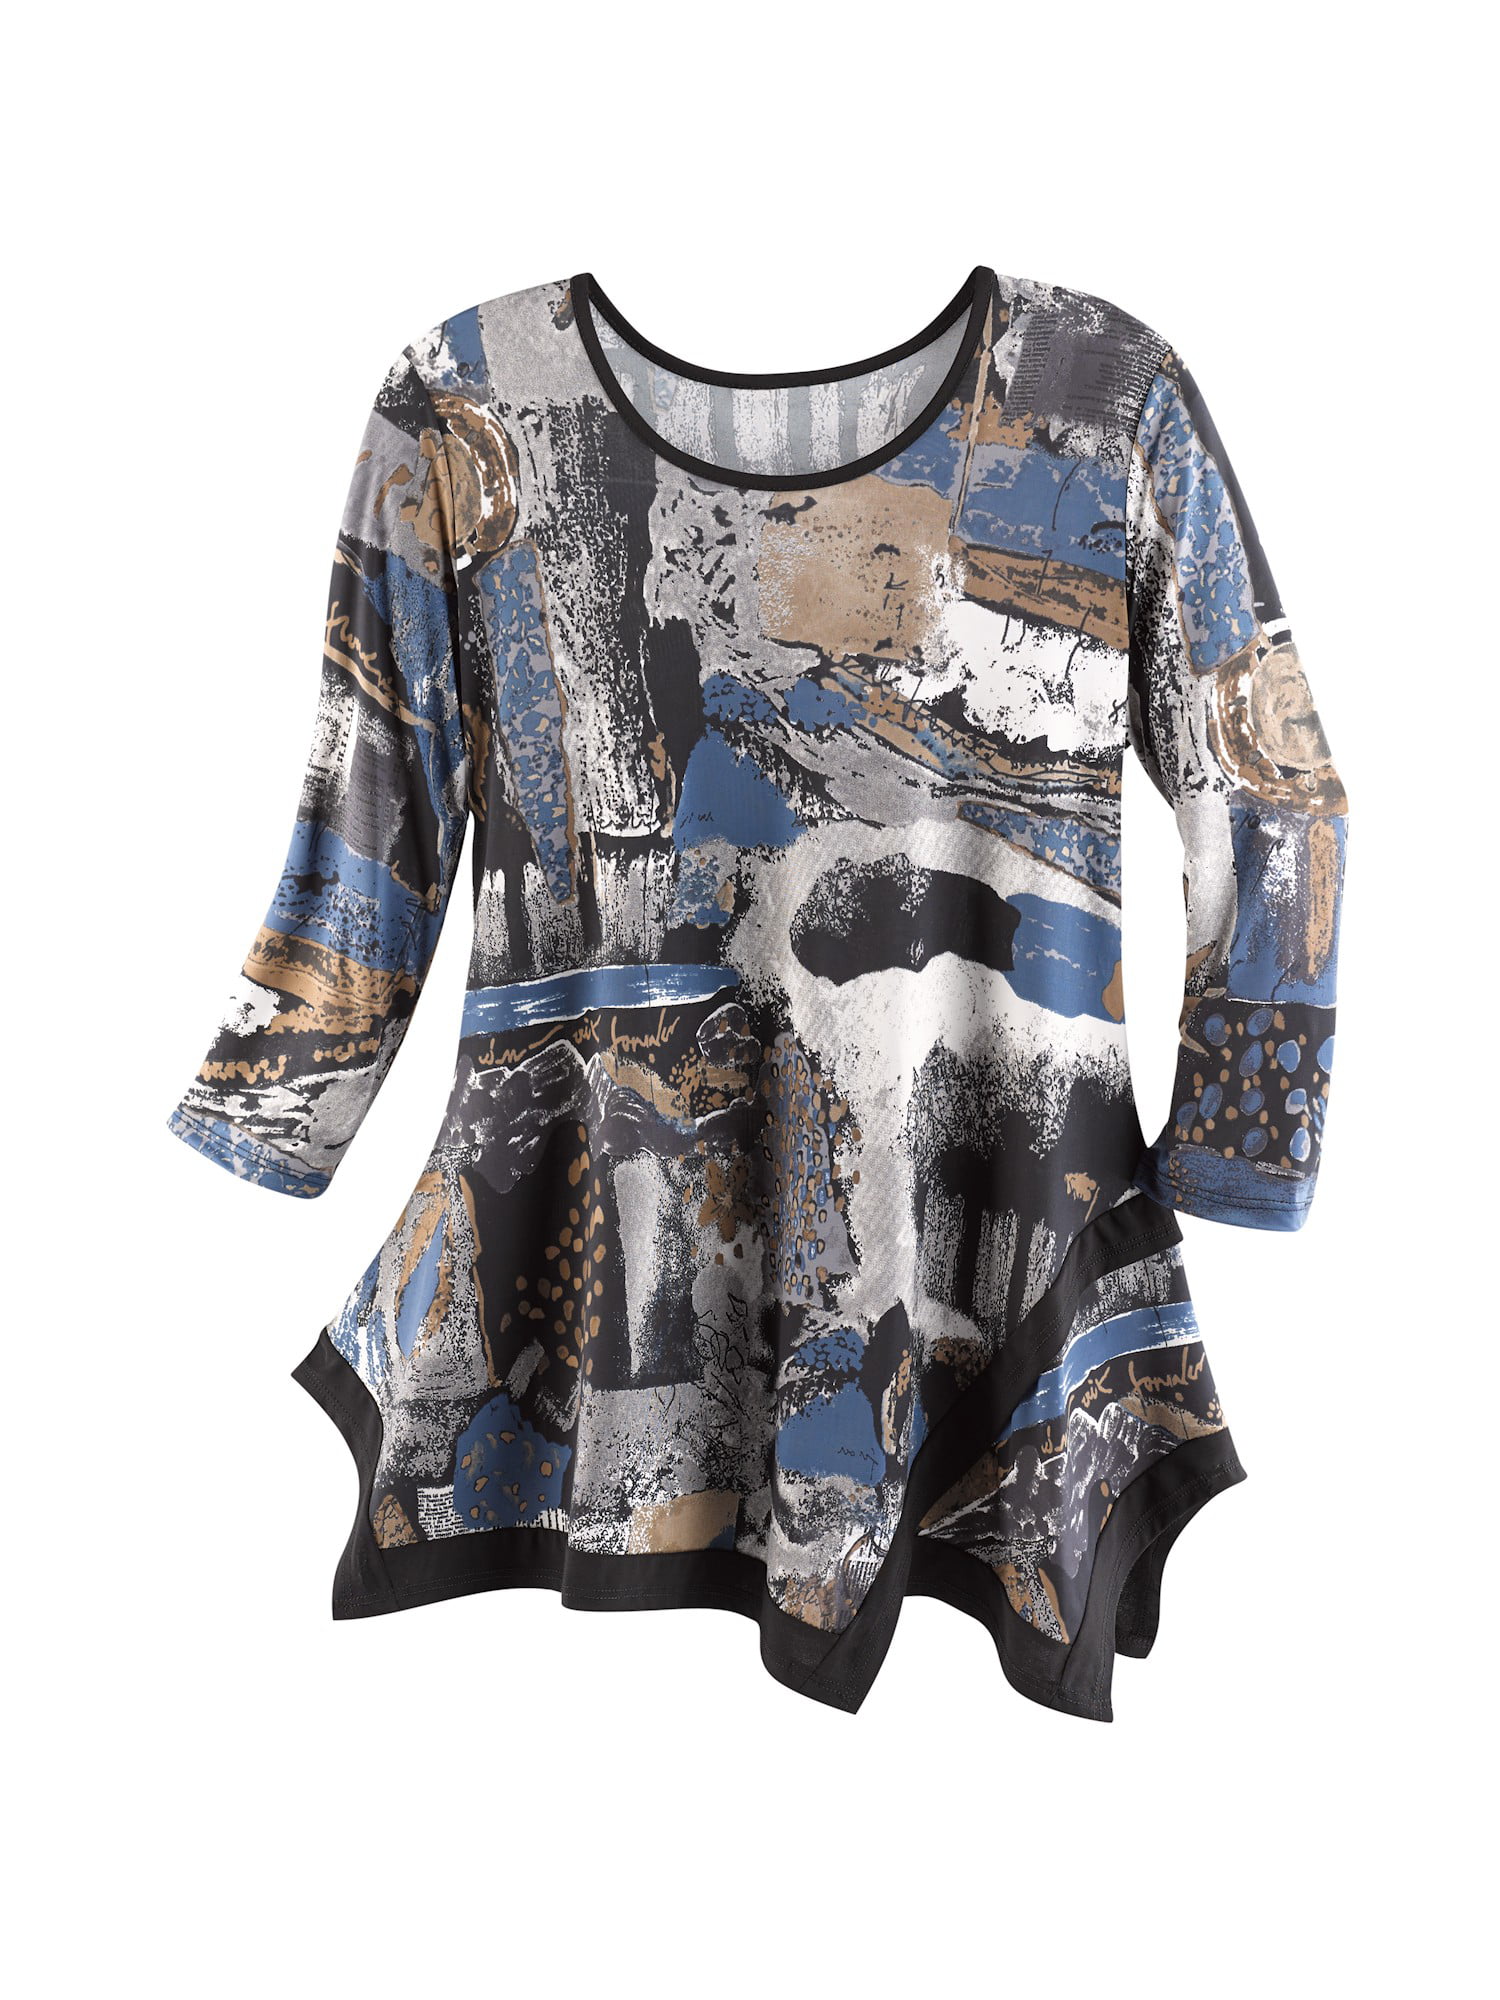 Caribe - Caribe Women's Blue and Brown Printed Tunic Top - 3/4 Sleeve ...